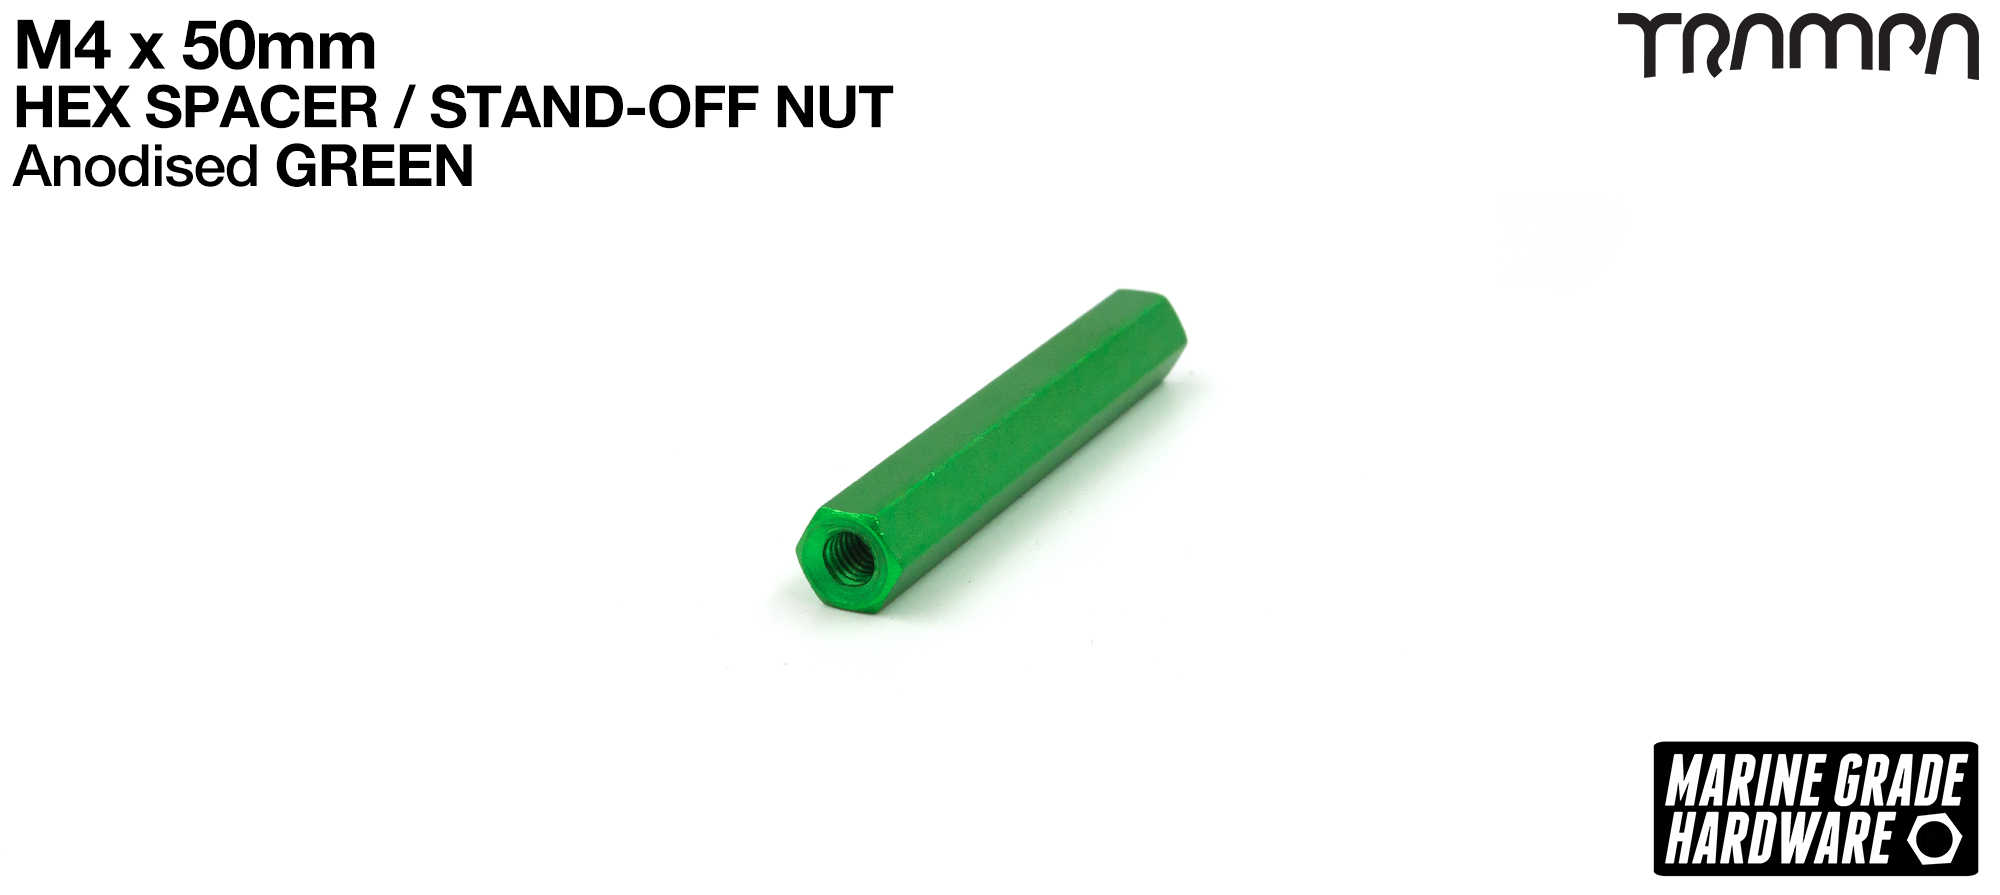 M4 x 50mm Aluminium Threaded HEX Spacer Nut used for assembling the MONSTER Battery Boxes - GREEN